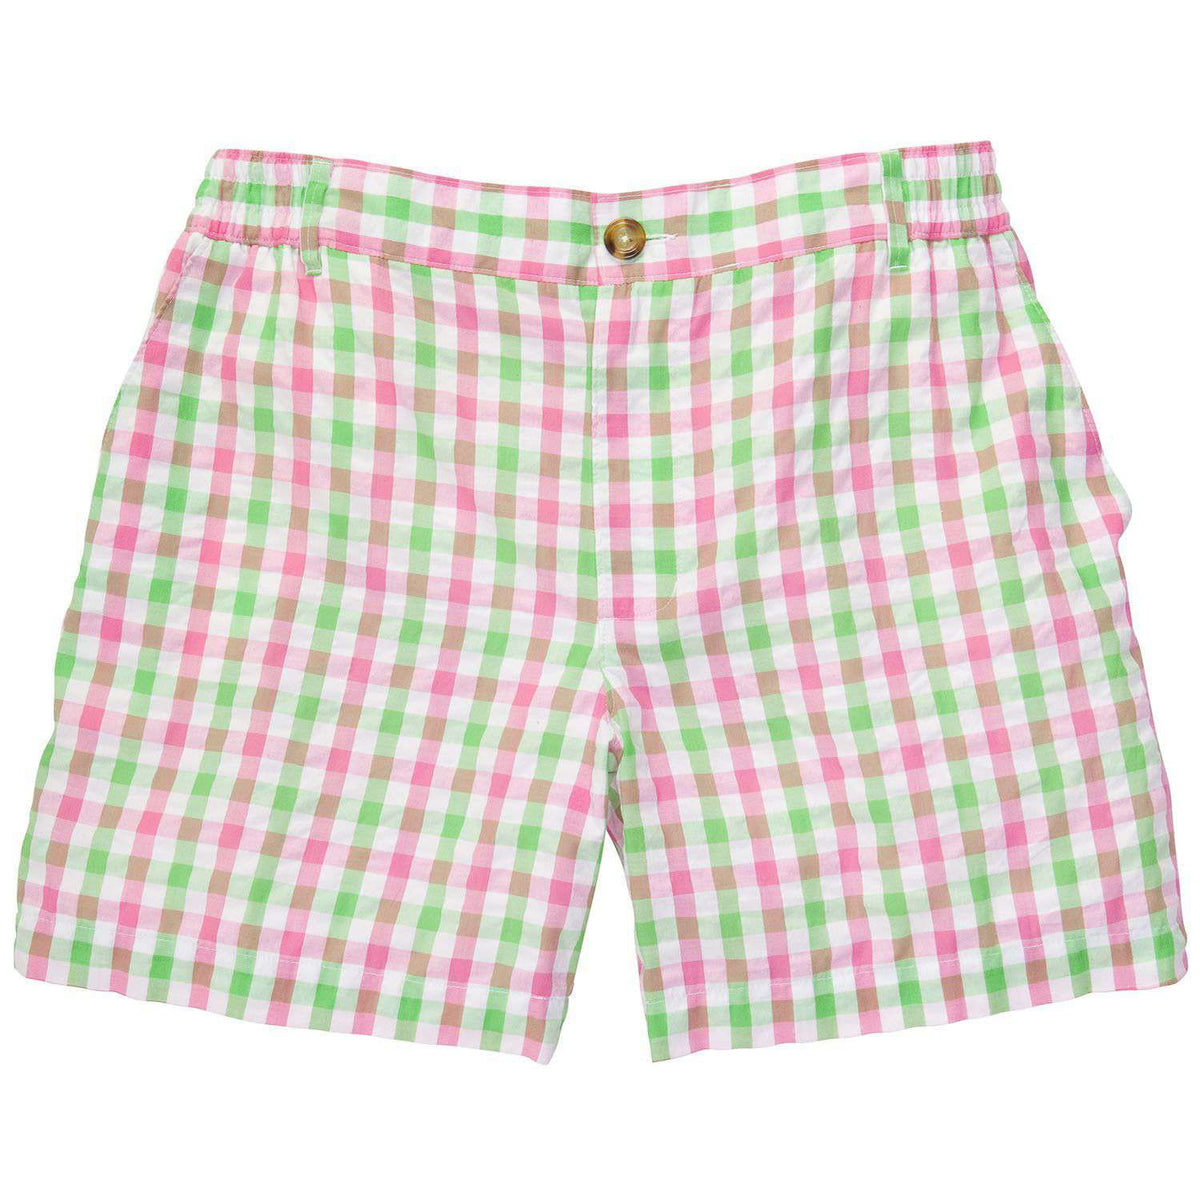 Pink and Green Seersucker Shorts by Southern Proper - Country Club Prep